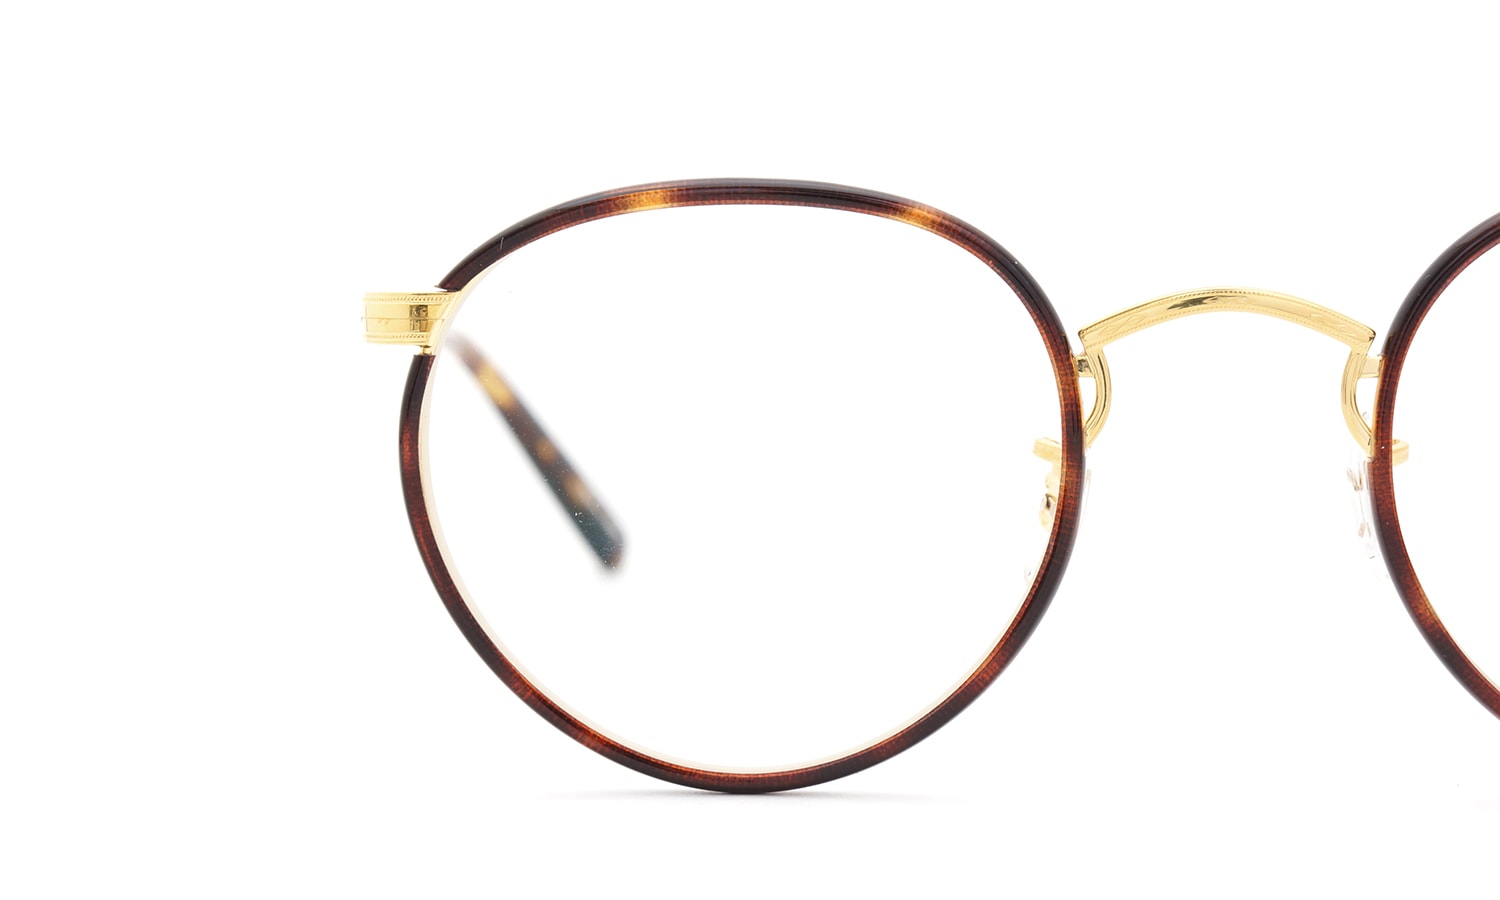 BUNNEY OPTICALS by OLIVER PEOPLES NHS-JOHN BROWN